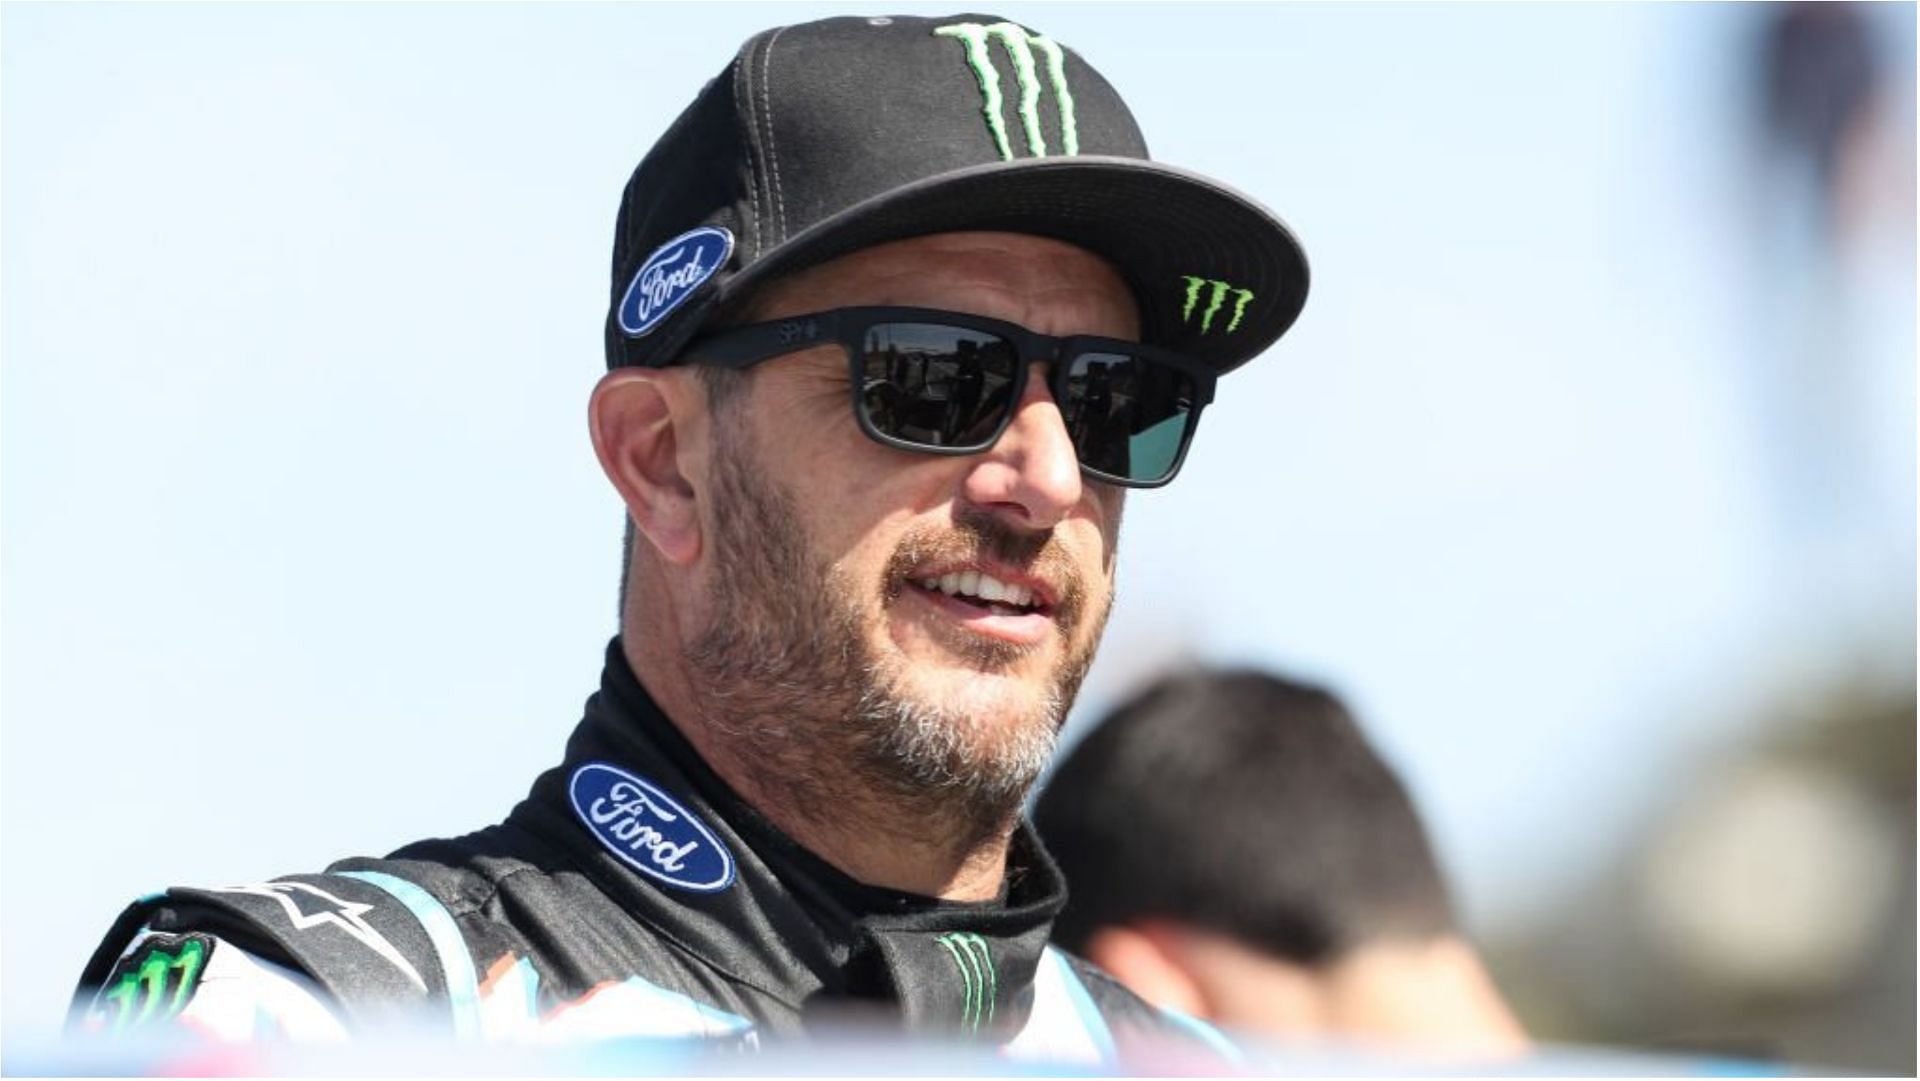 Ken Block recently died at the age of 55 (Image via Paulo Oliveira/Getty Images)